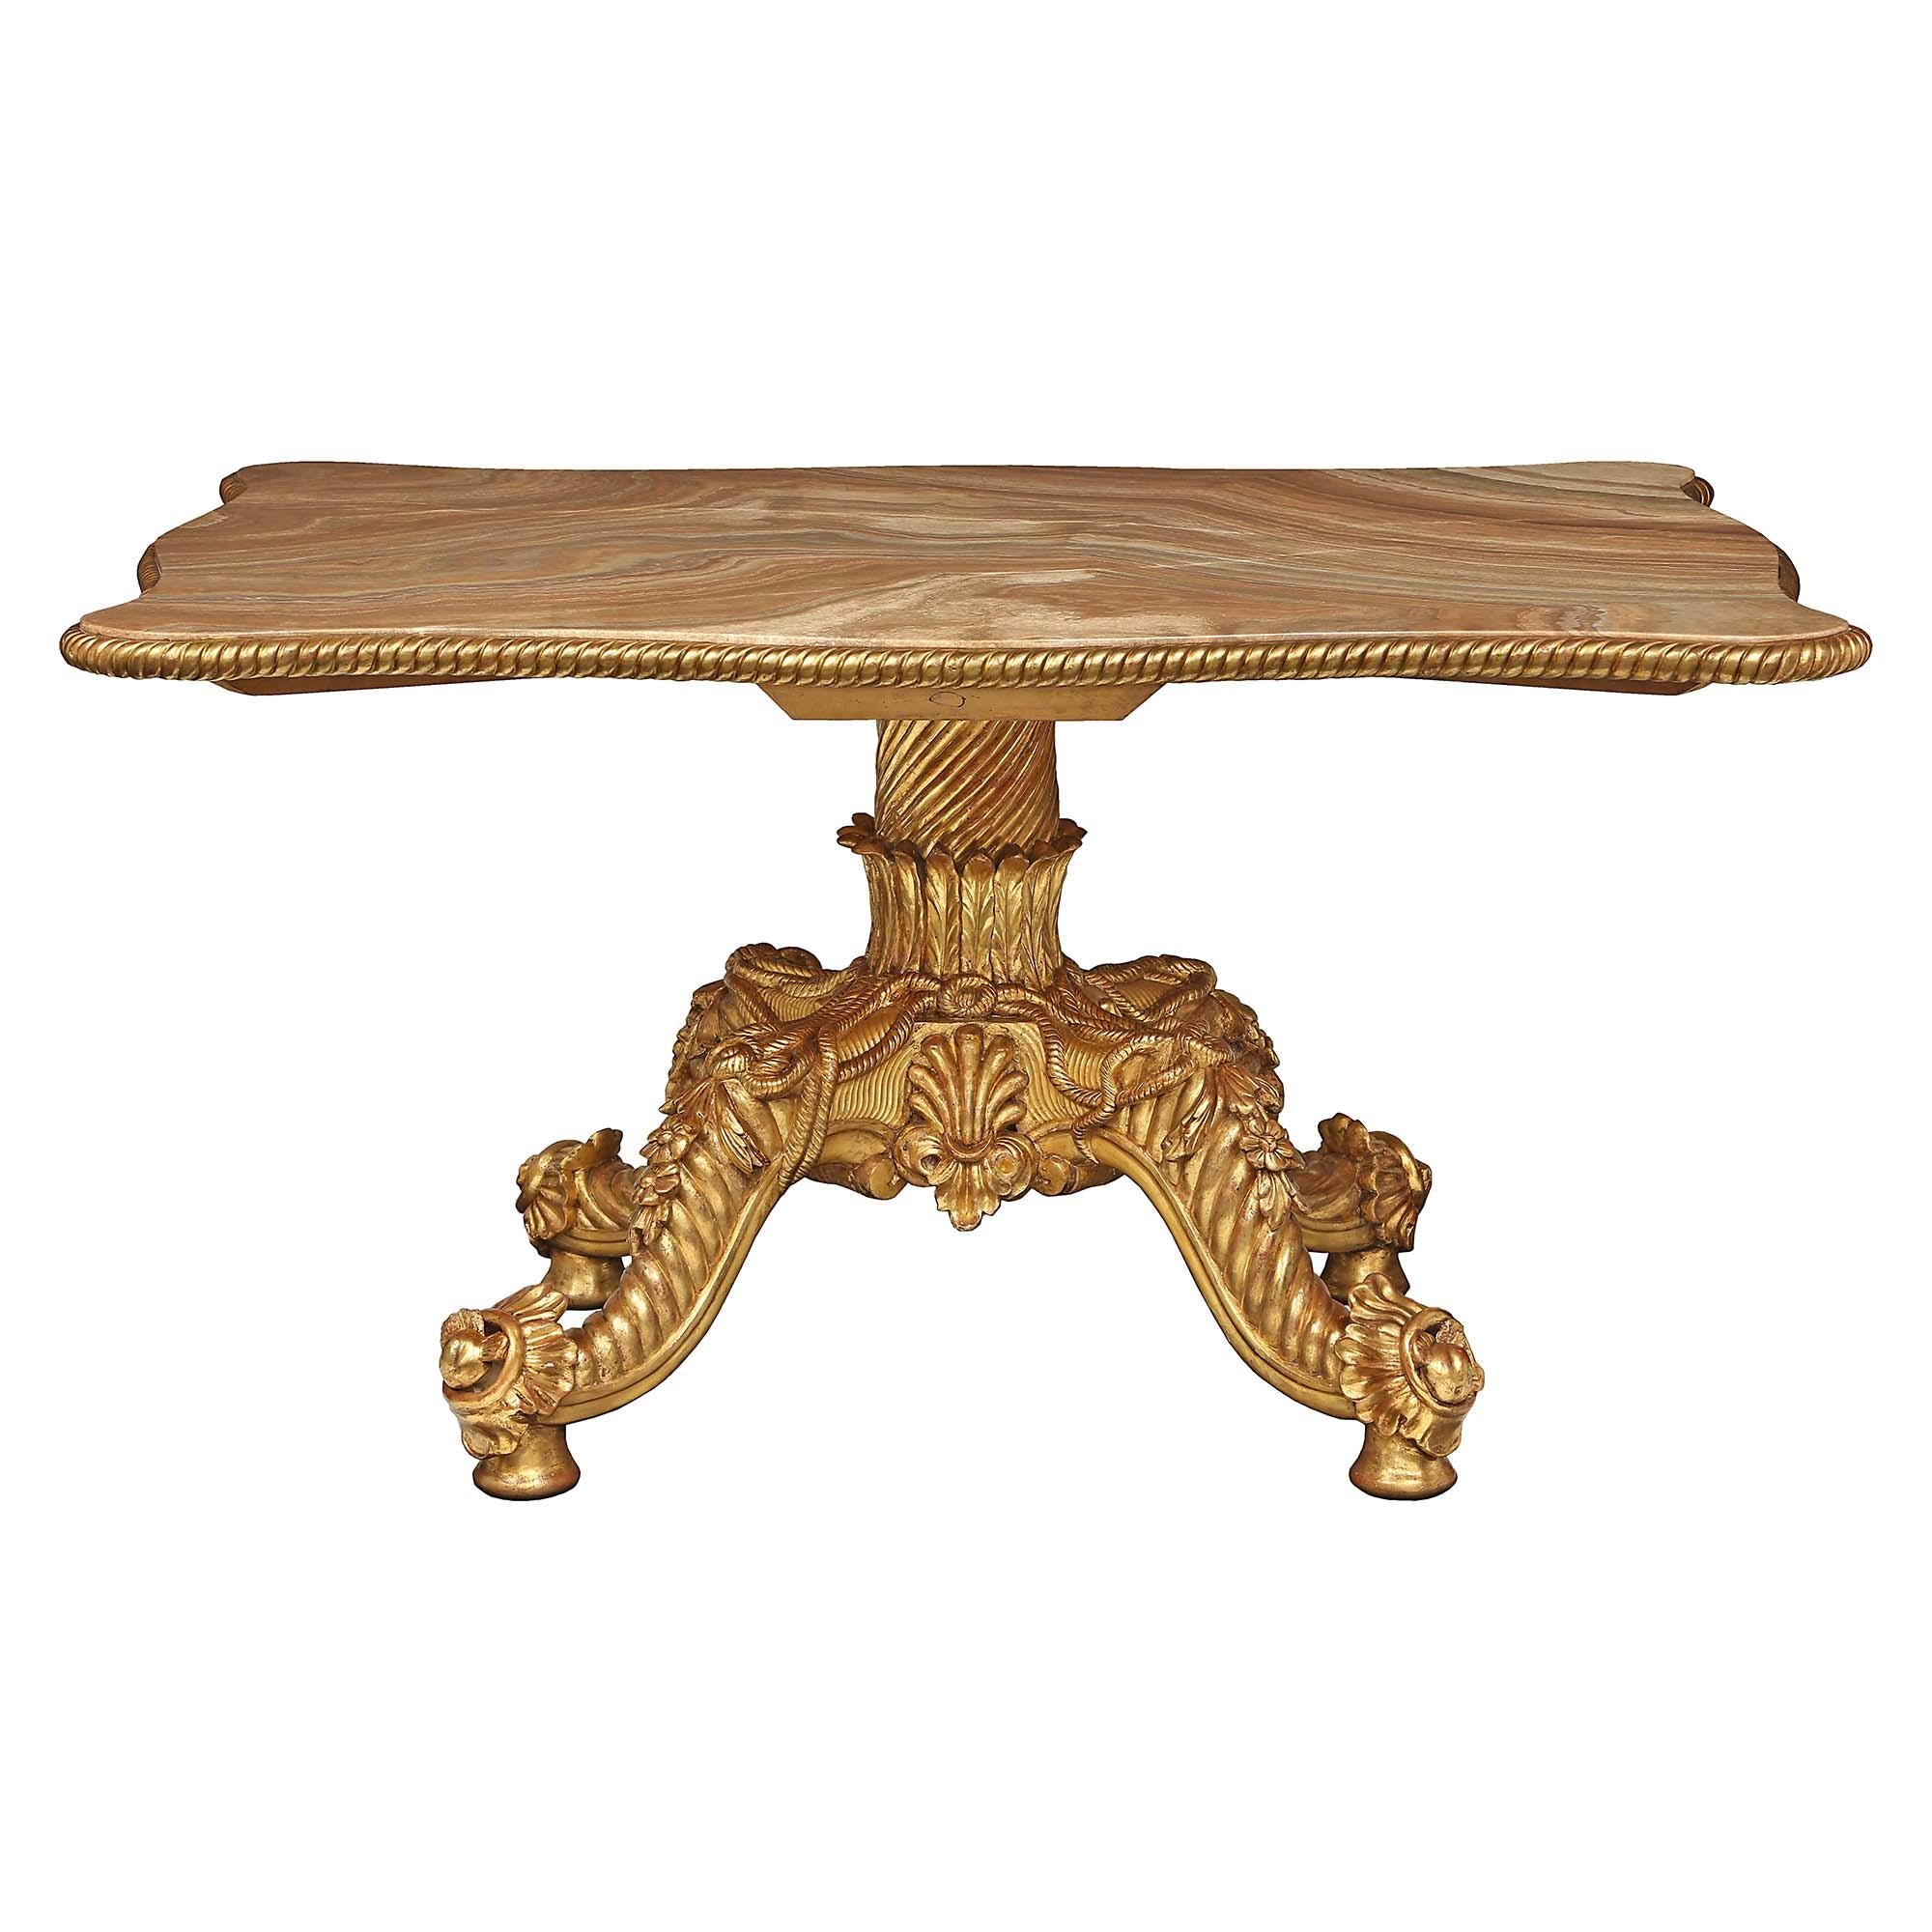 A spectacular Italian 19th-century giltwood and onyx center table. The table is raised by an intricate and richly carved base with four handsomely poised legs. Each leg is elegantly decorated with a twisted rope design and adorned with fine floral